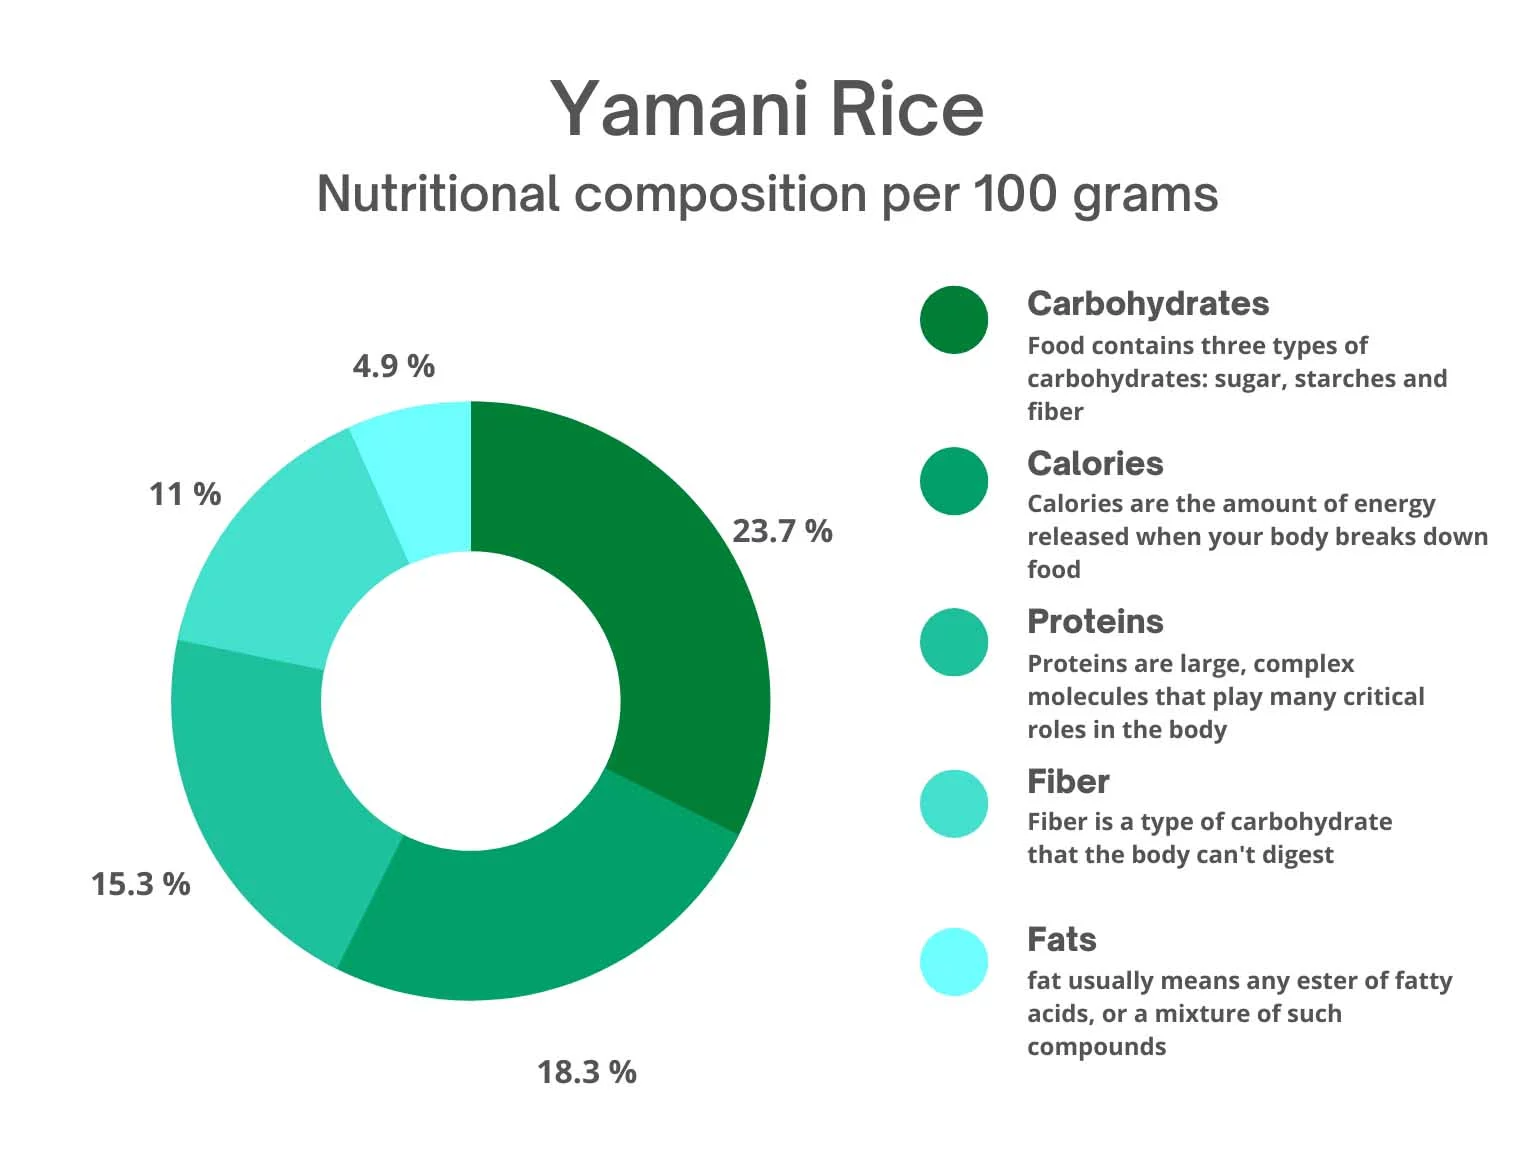 Yamani rice nutritional composition per 100g